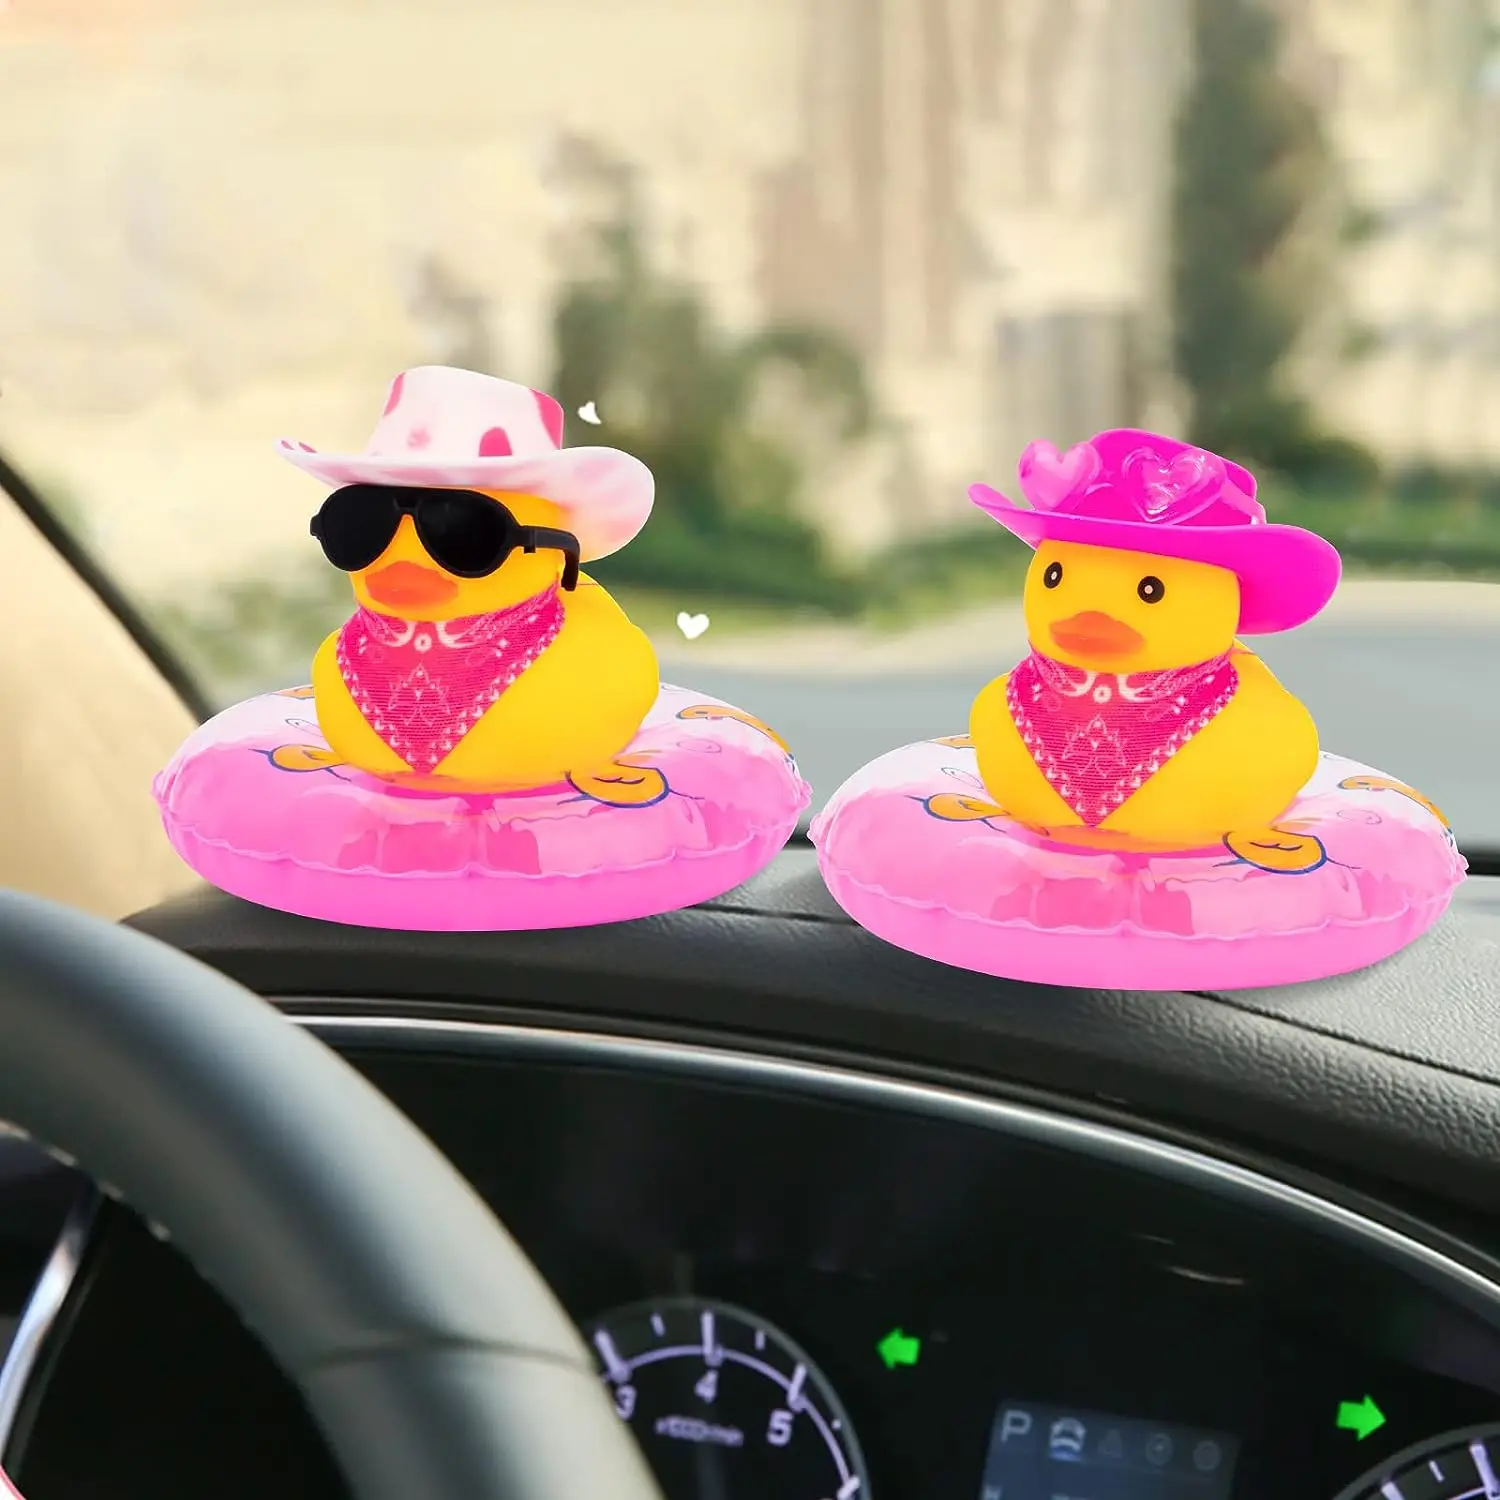 Oration west cowboy duck car dashboard decoration accessories with swim ring cowboy hat thumb200